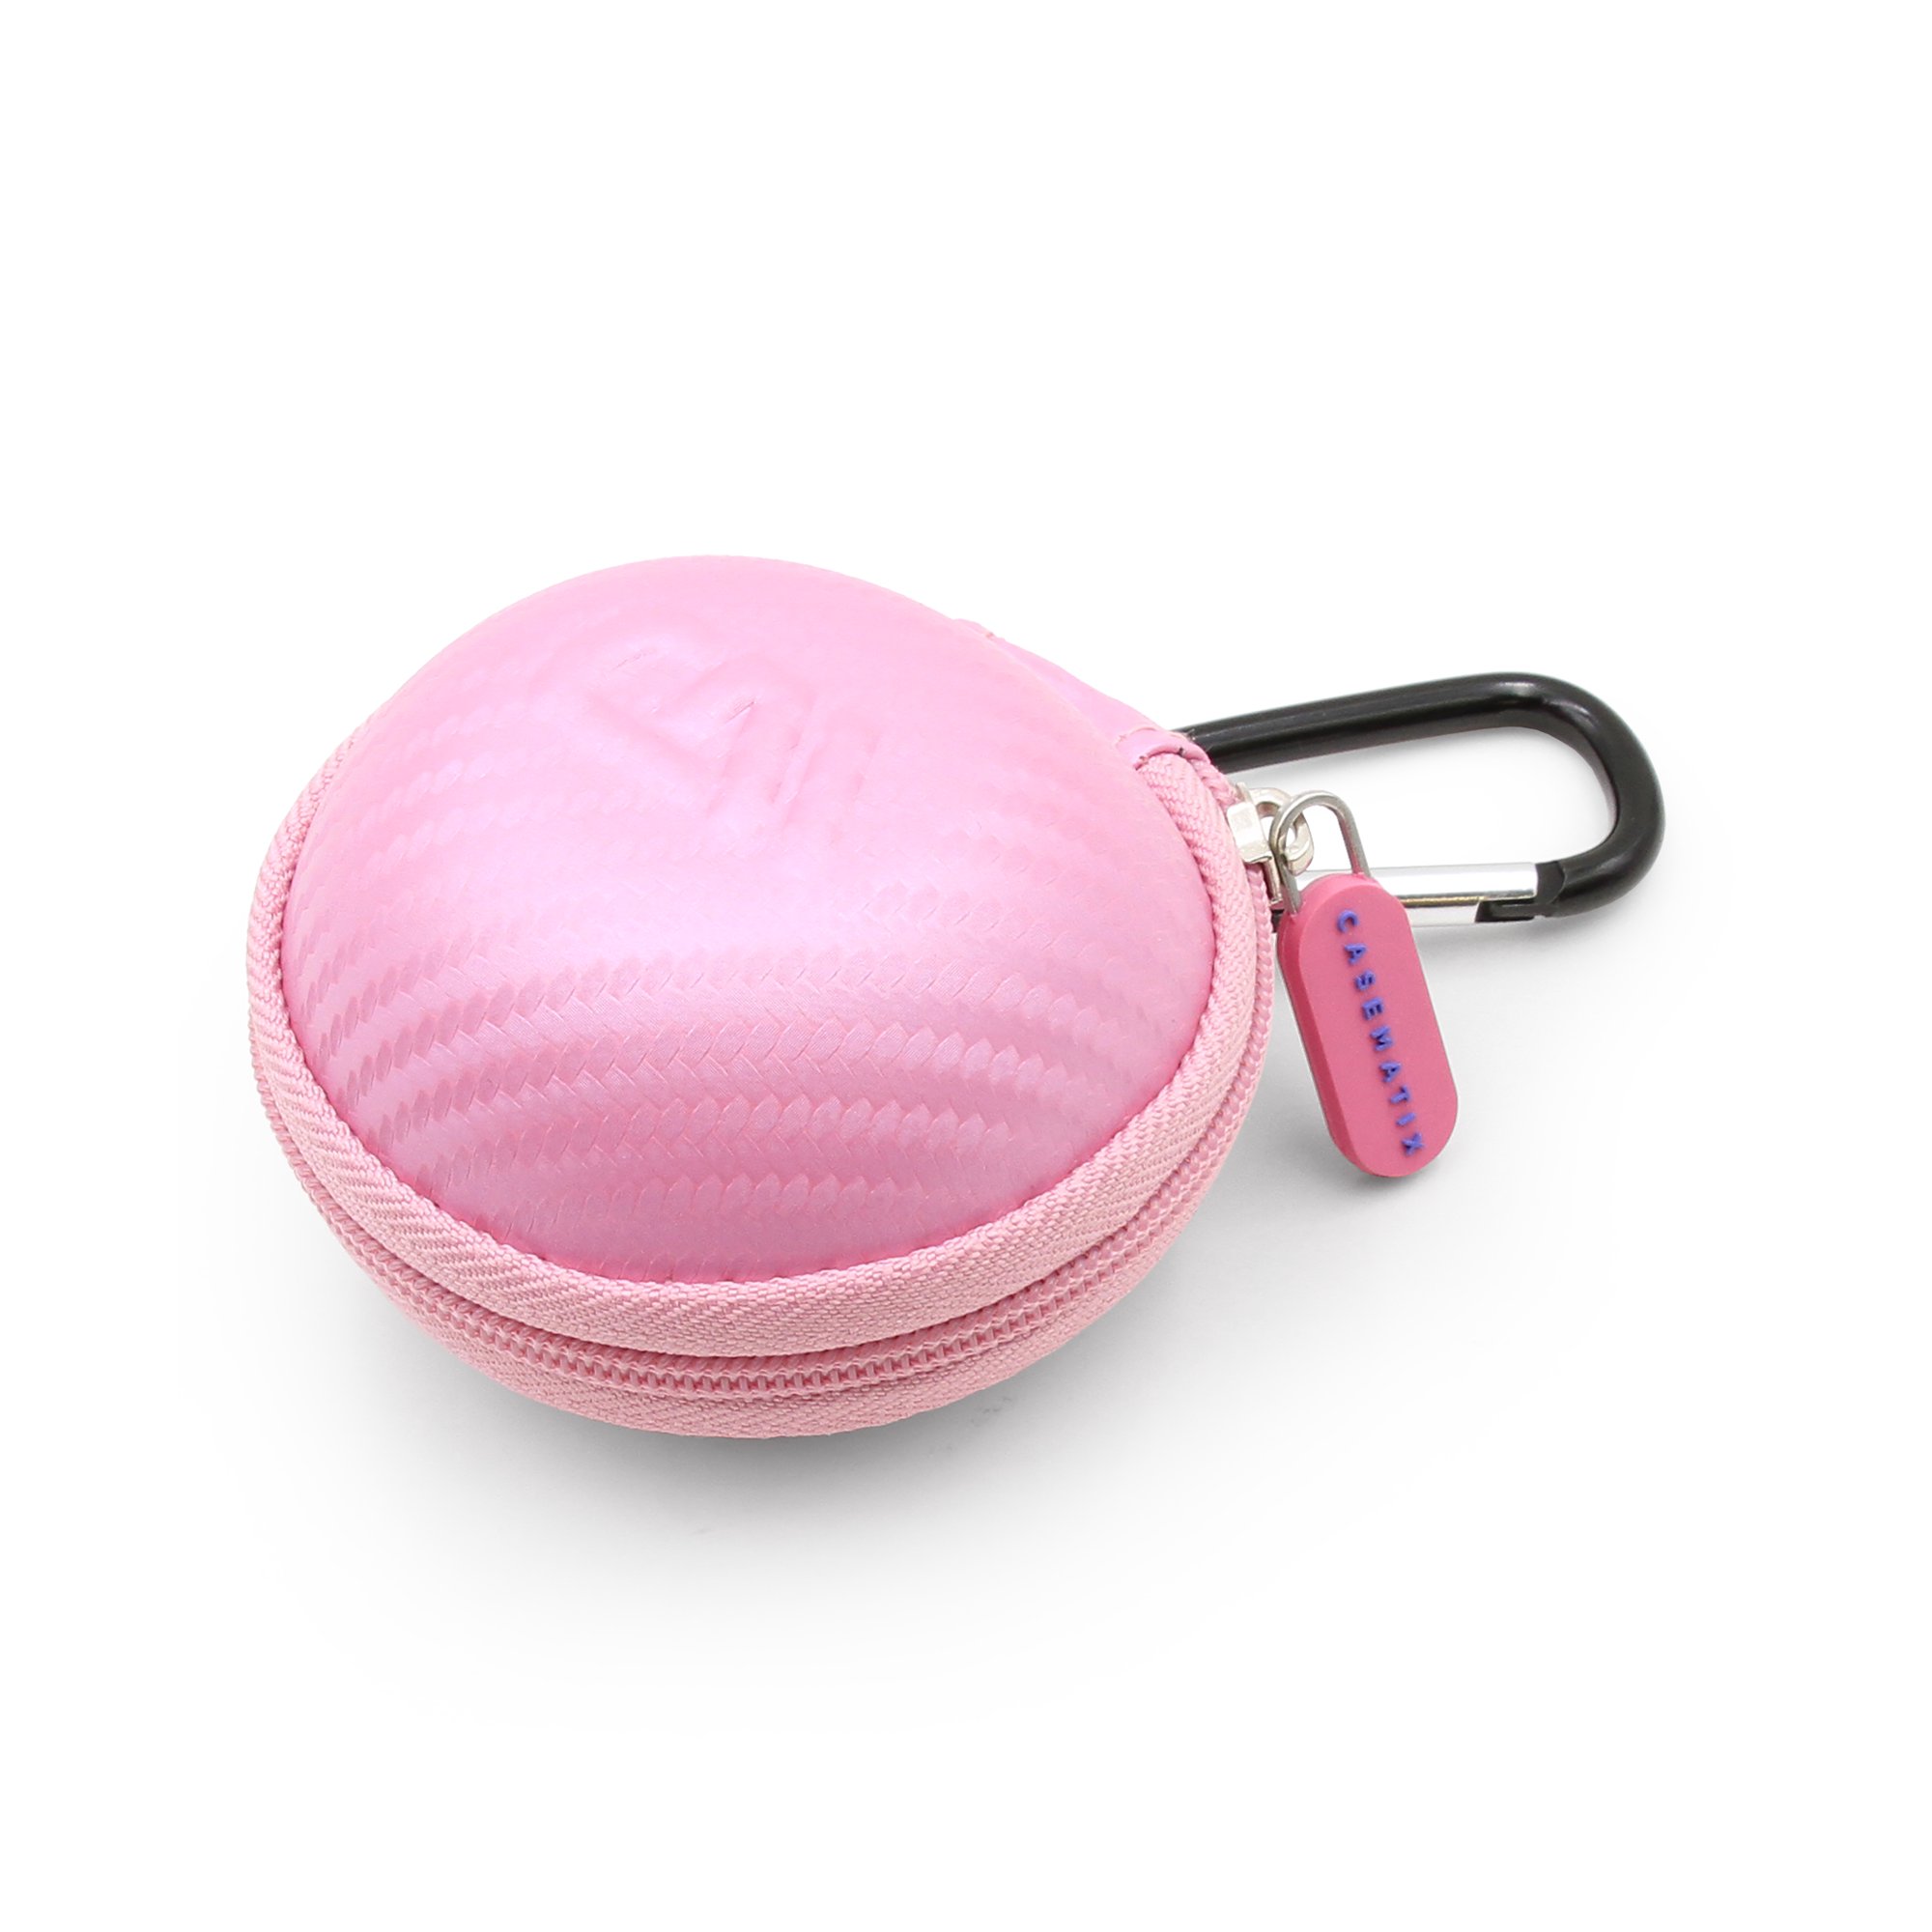 Charged Up Key Chain Pouch